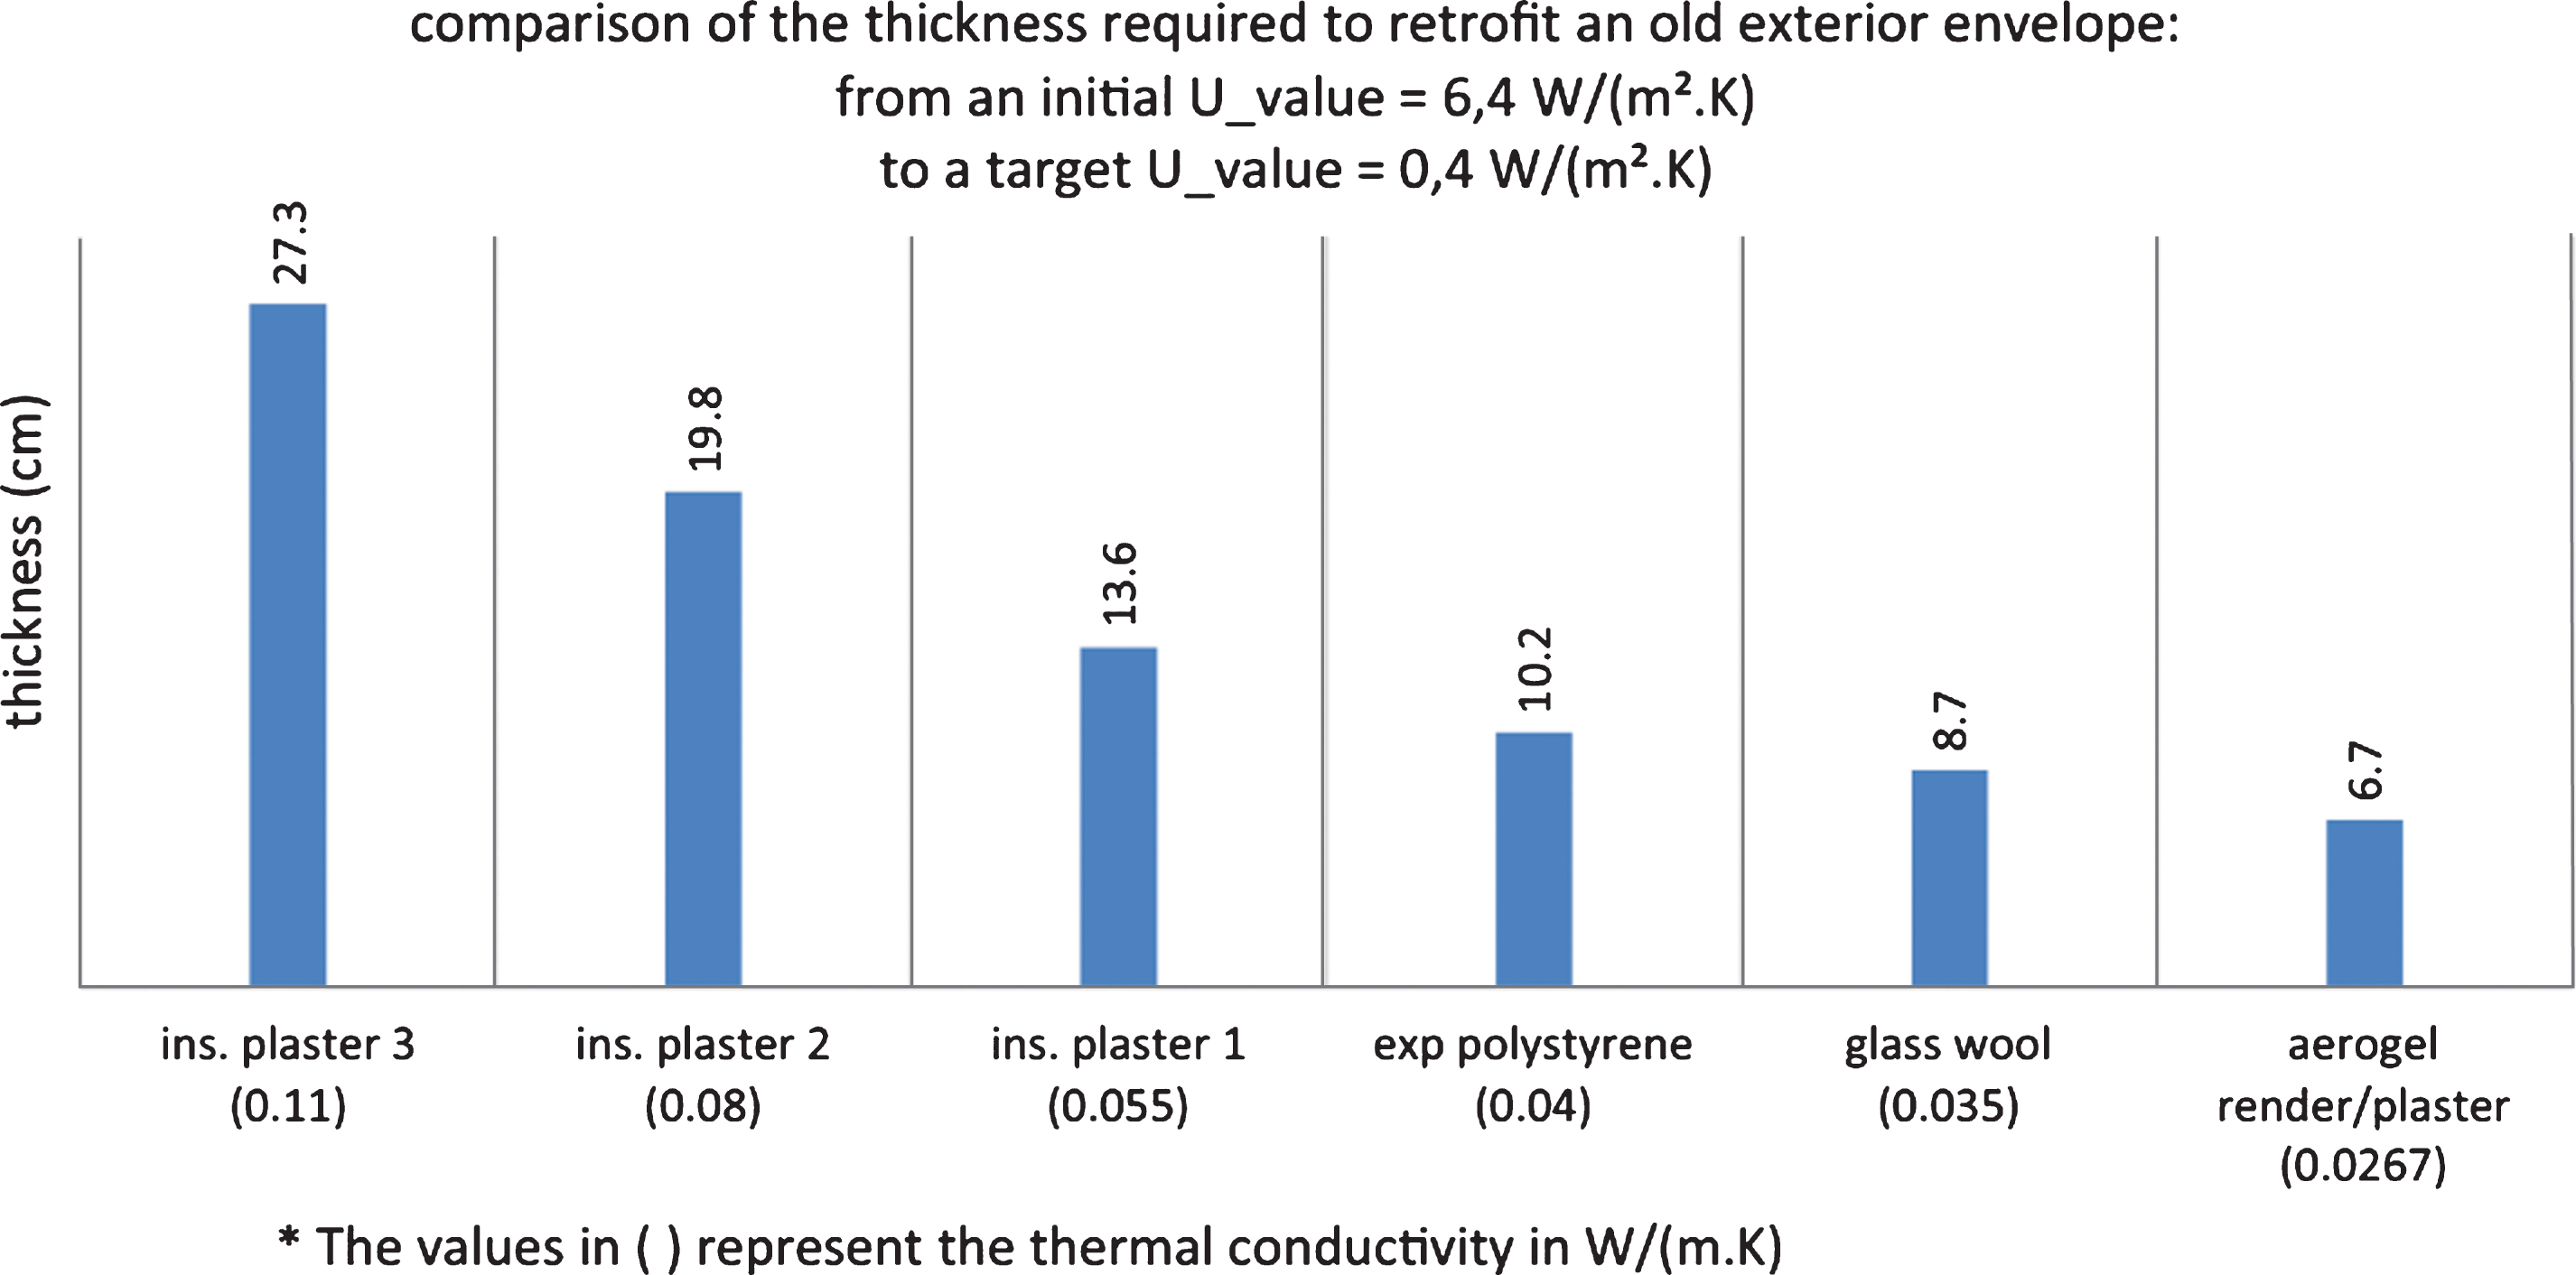 Comparison of the thickness required to retrofit an old exterior envelope from an initial U-value of 6.4 W/(m2 K) to a target U-value of 0.4 W/(m2 K) with different insulating materials (Ibrahim et al., 2015a).